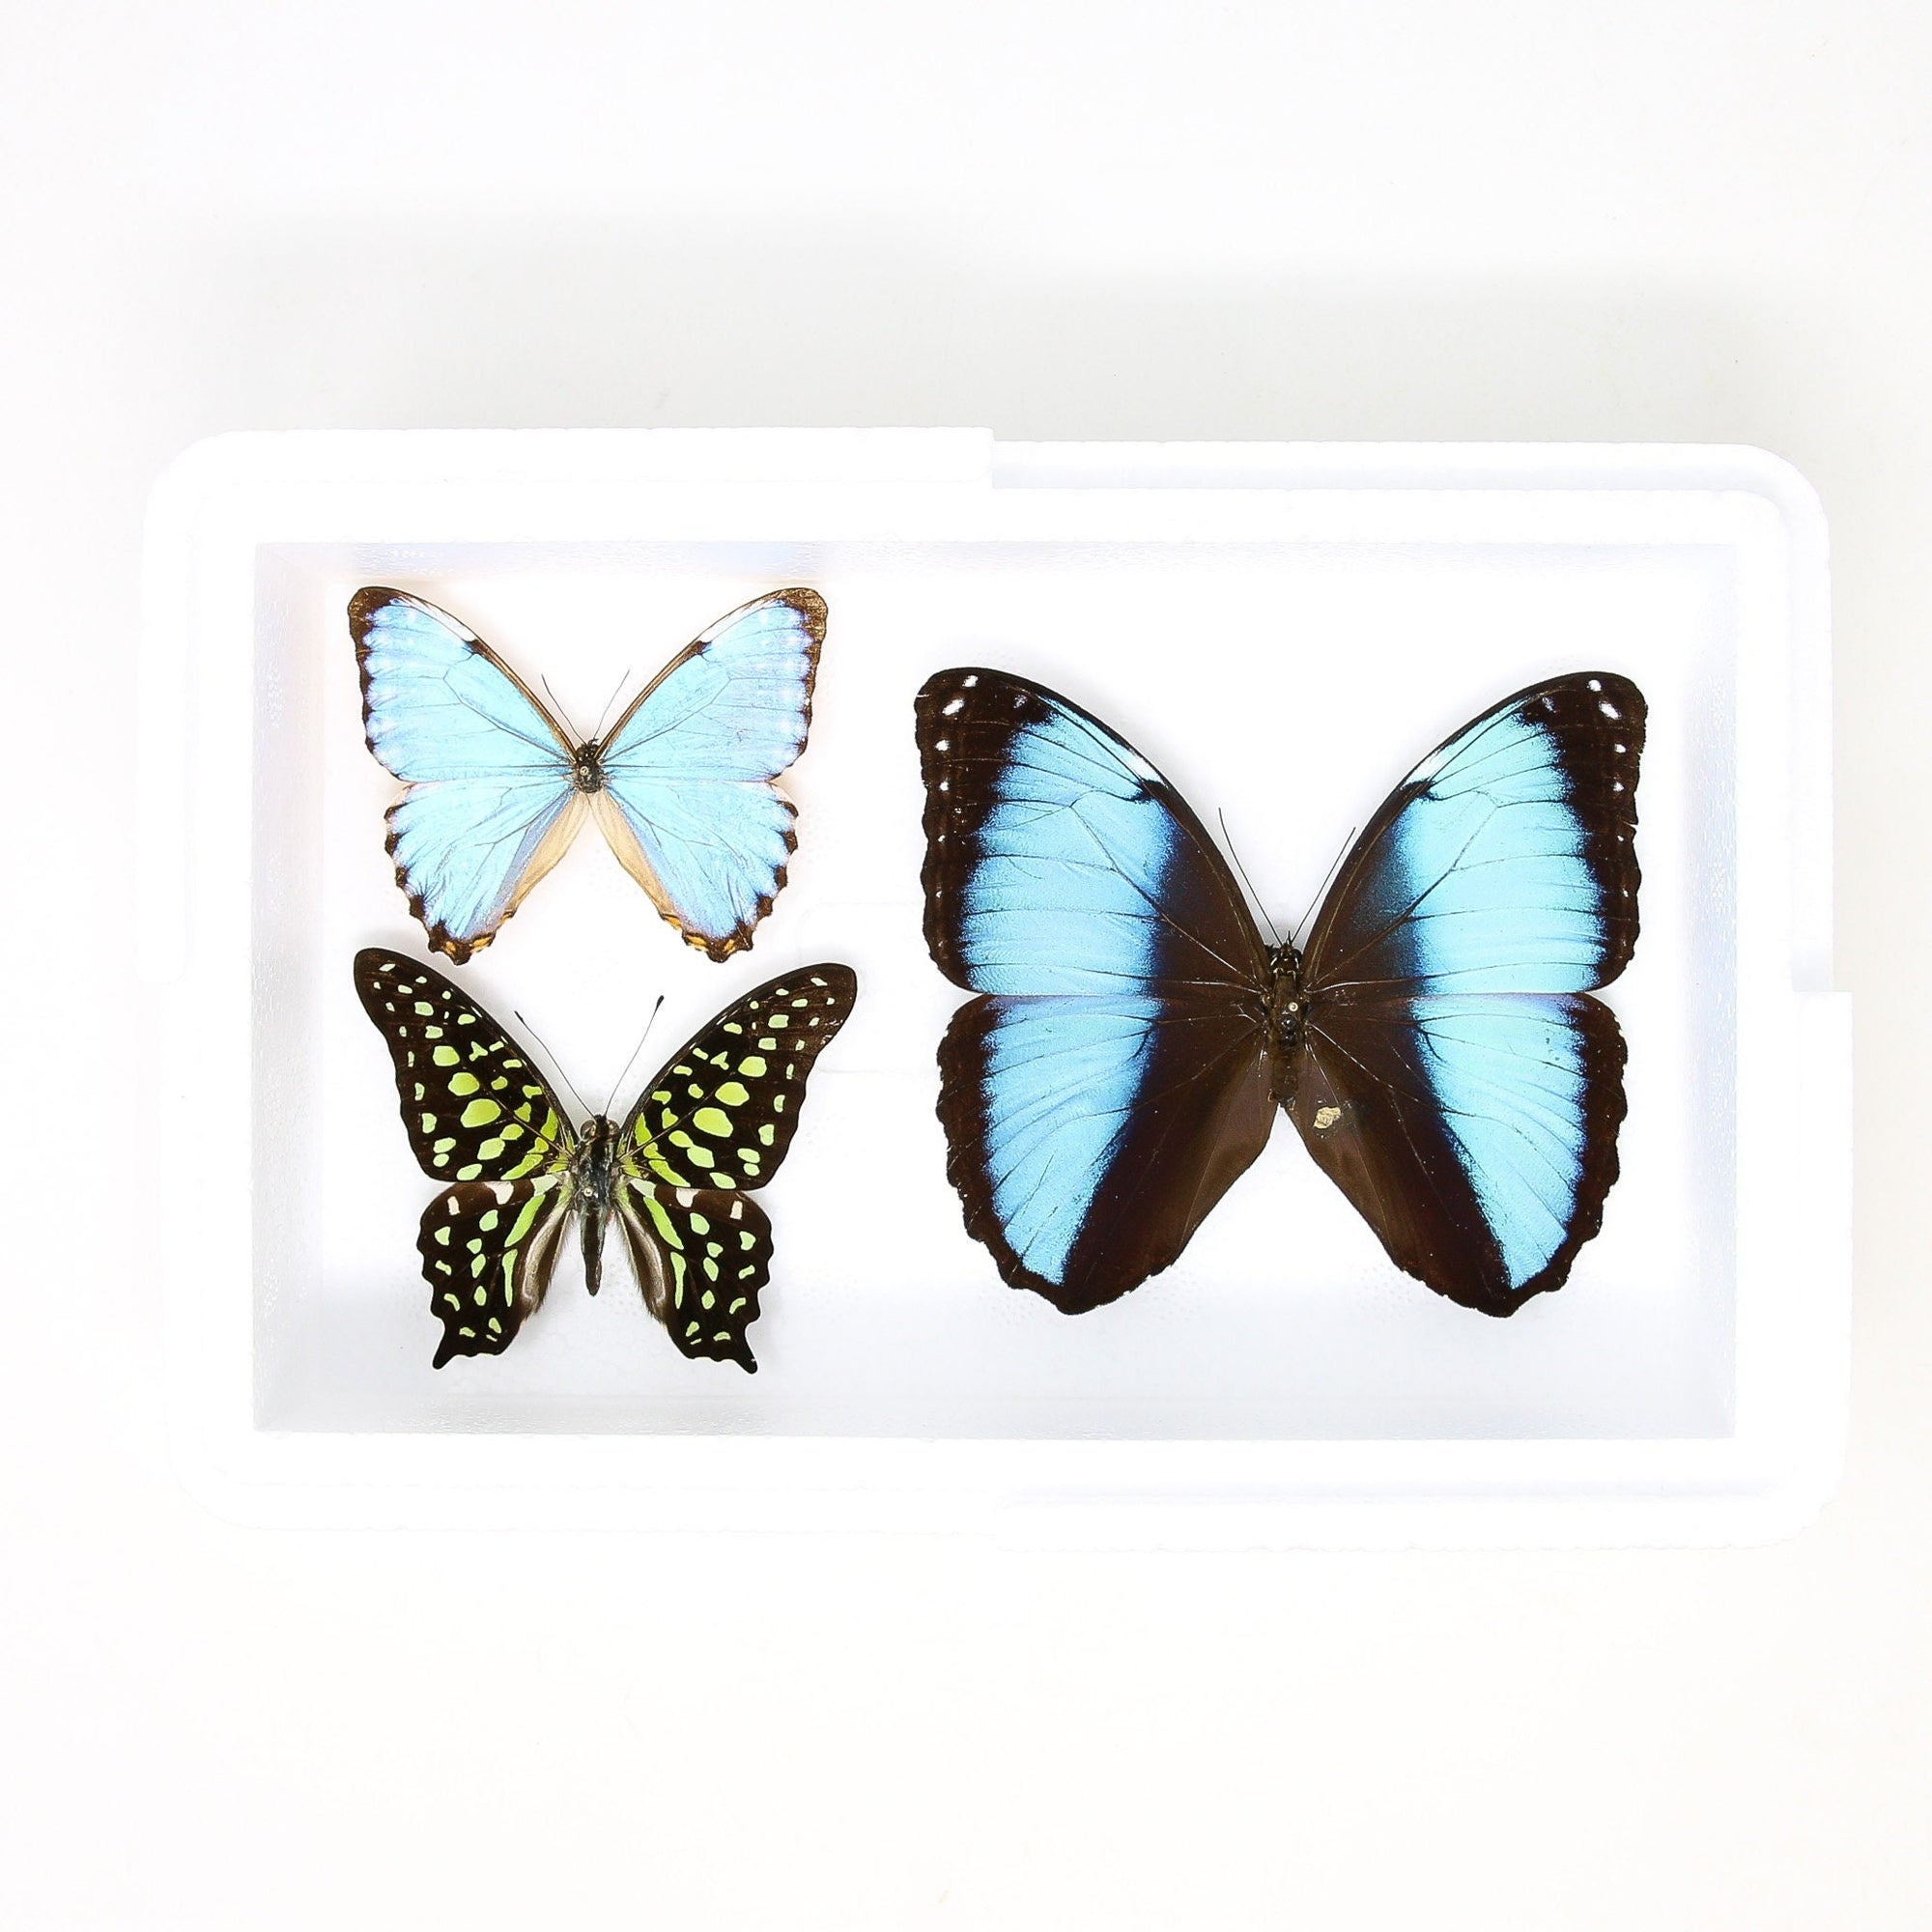 Pinned Tropical Butterflies, A1 Real Pinned Set Butterfly Specimens, Entomology Taxidermy (#BUT26)